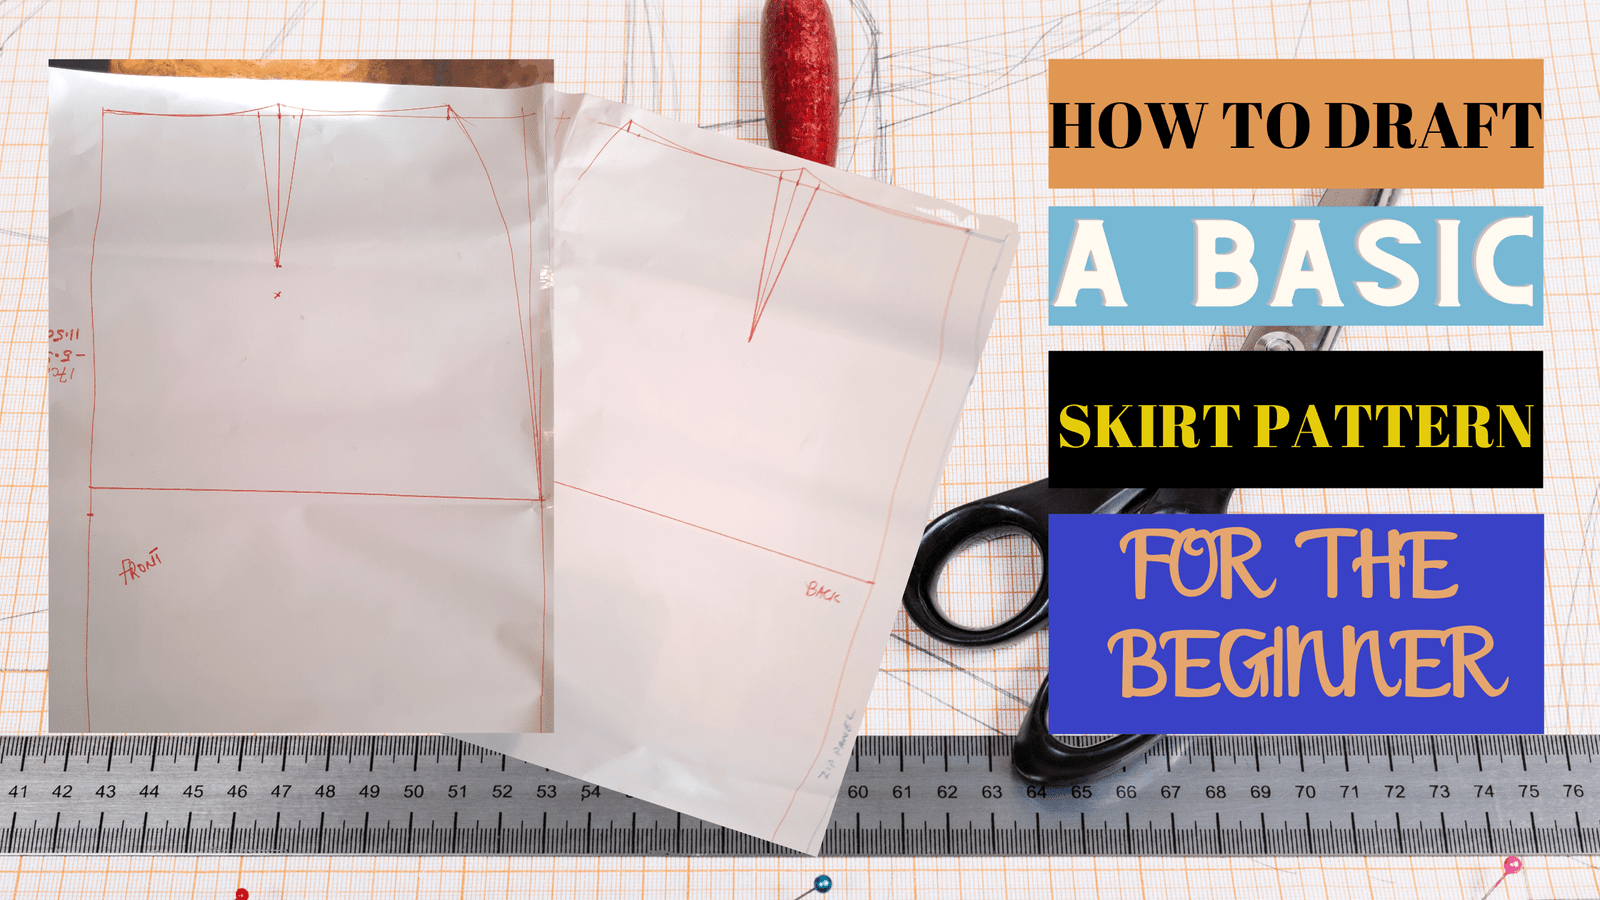 You are currently viewing HOW TO DRAFT A SIMPLE SKIRT PATTERN AS A BEGINNER